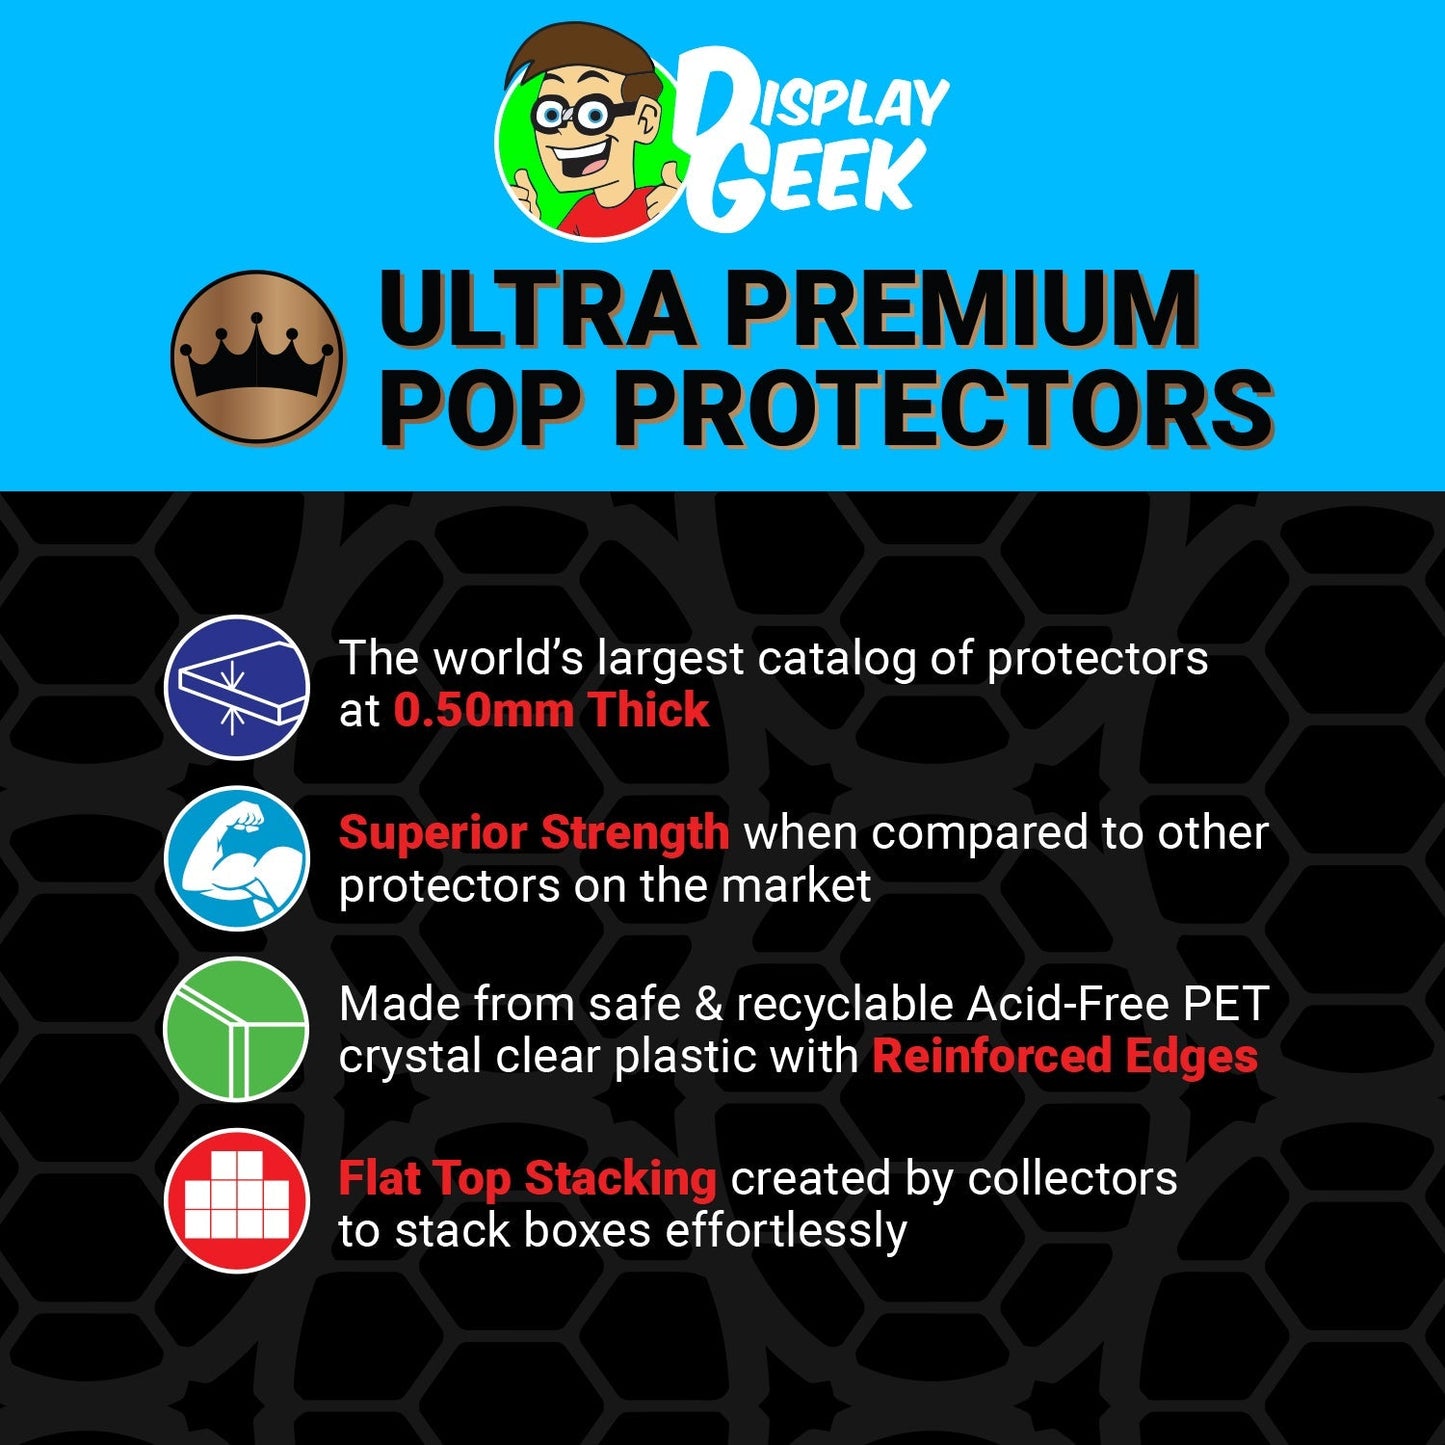 Pop Protector for Beetlejuice with Dante's Inferno Room #06 Funko Pop Town - PPG Pop Protector Guide Search Created by Display Geek